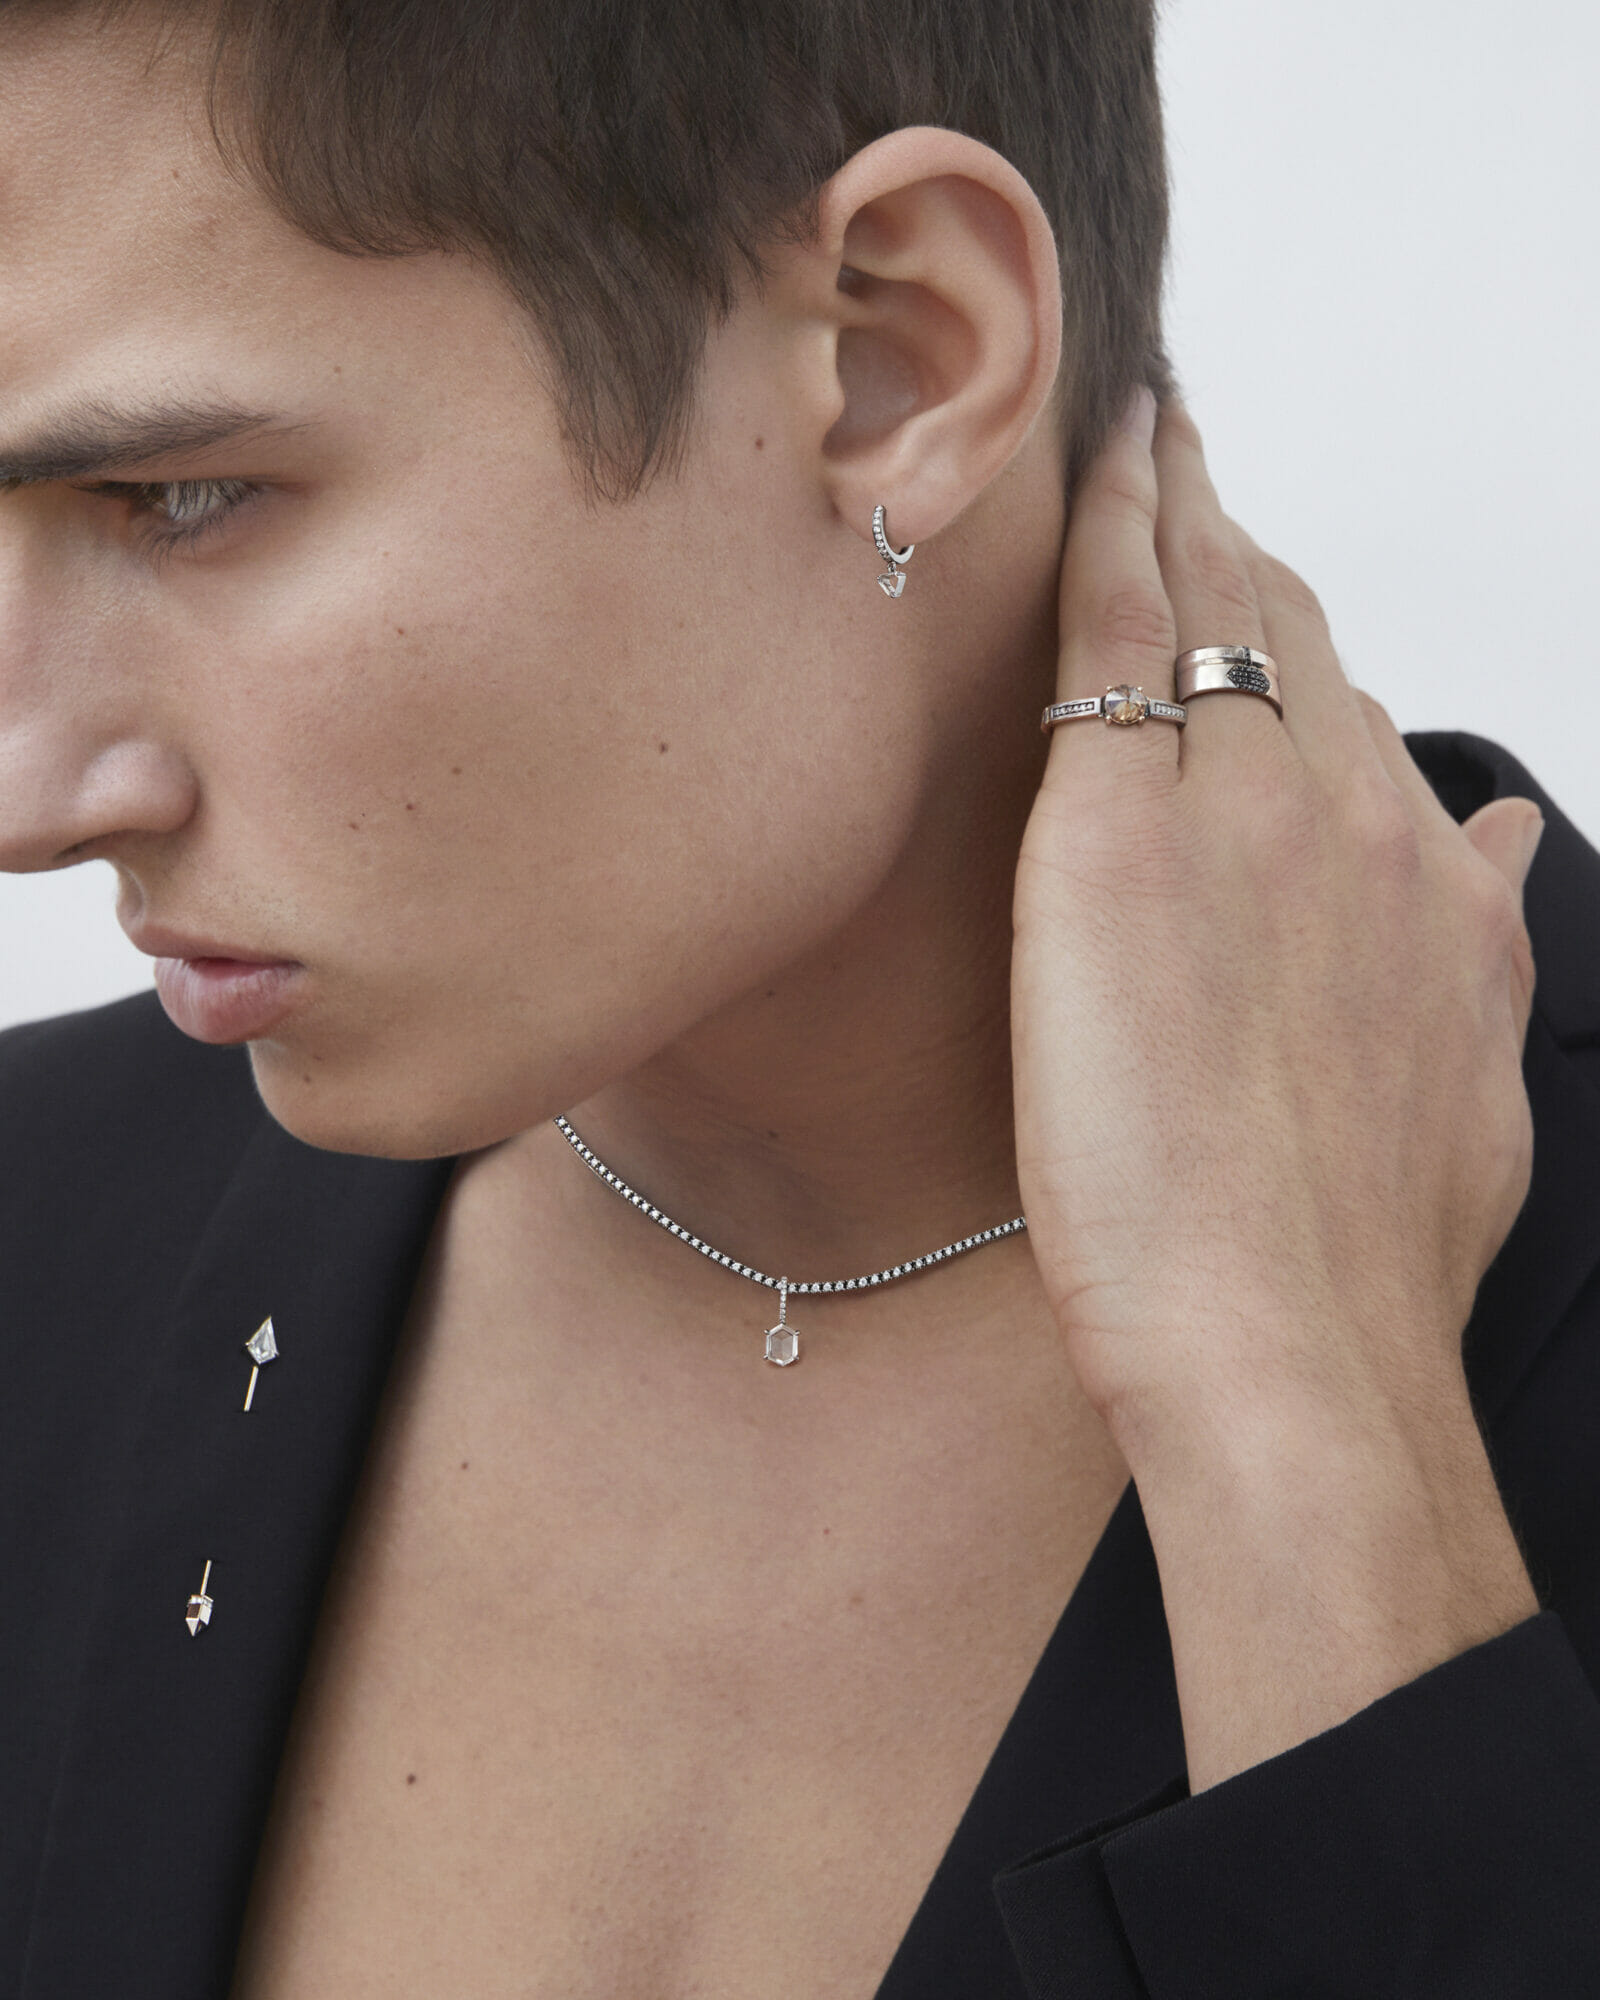 Gender neutral jewelry, man closeup, ring, necklace, earring